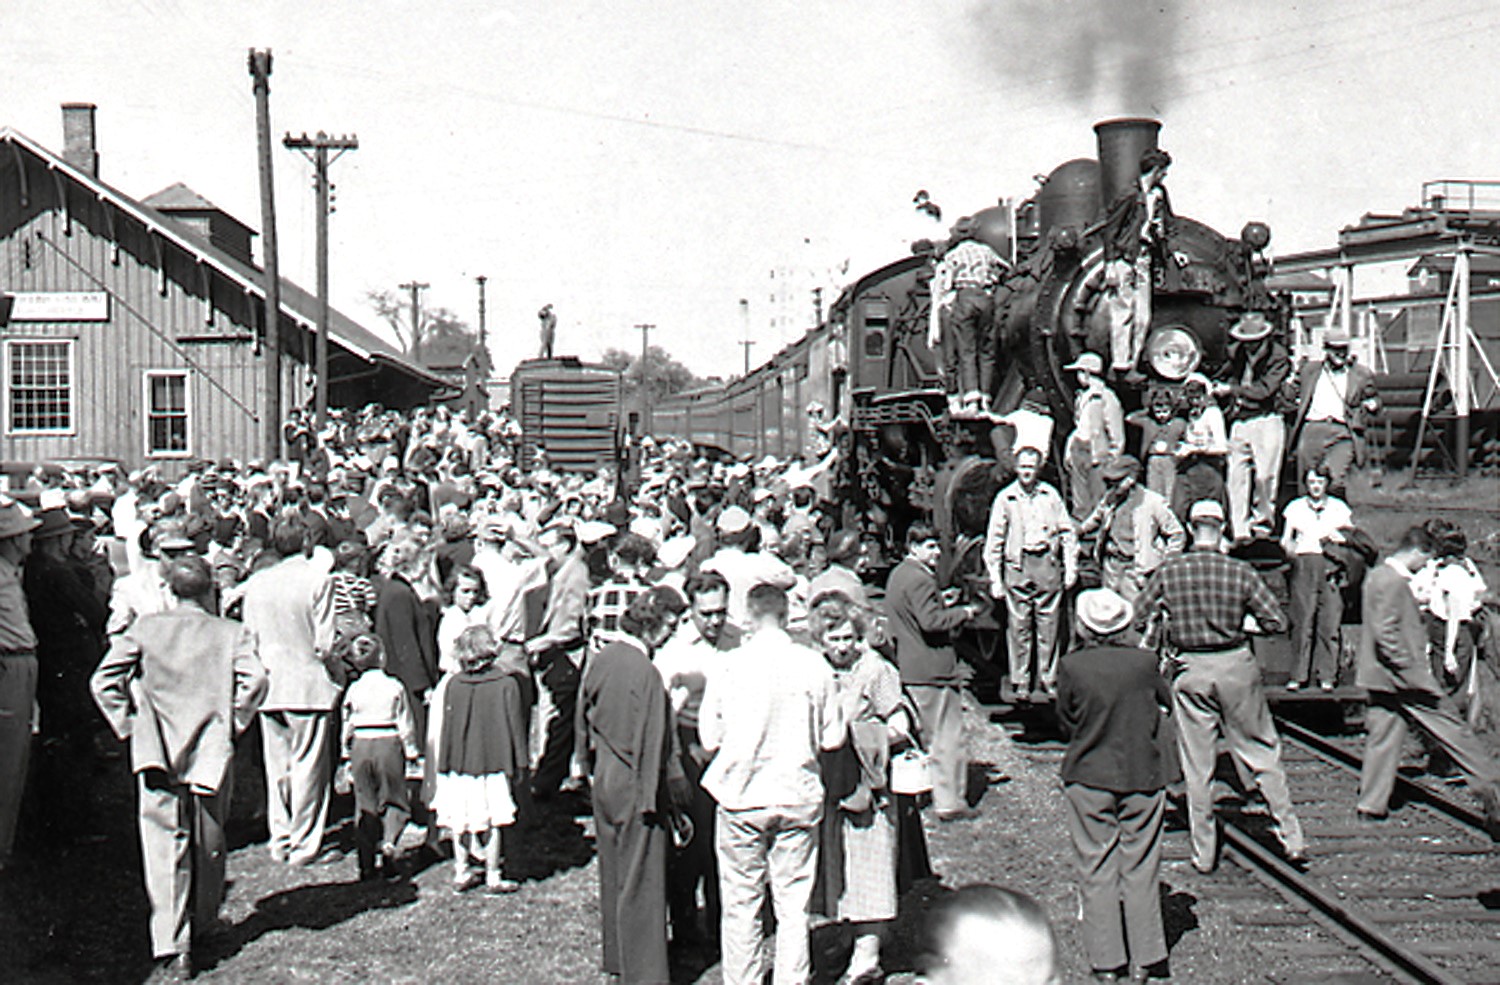 GTW Jackson Depot and Crowd